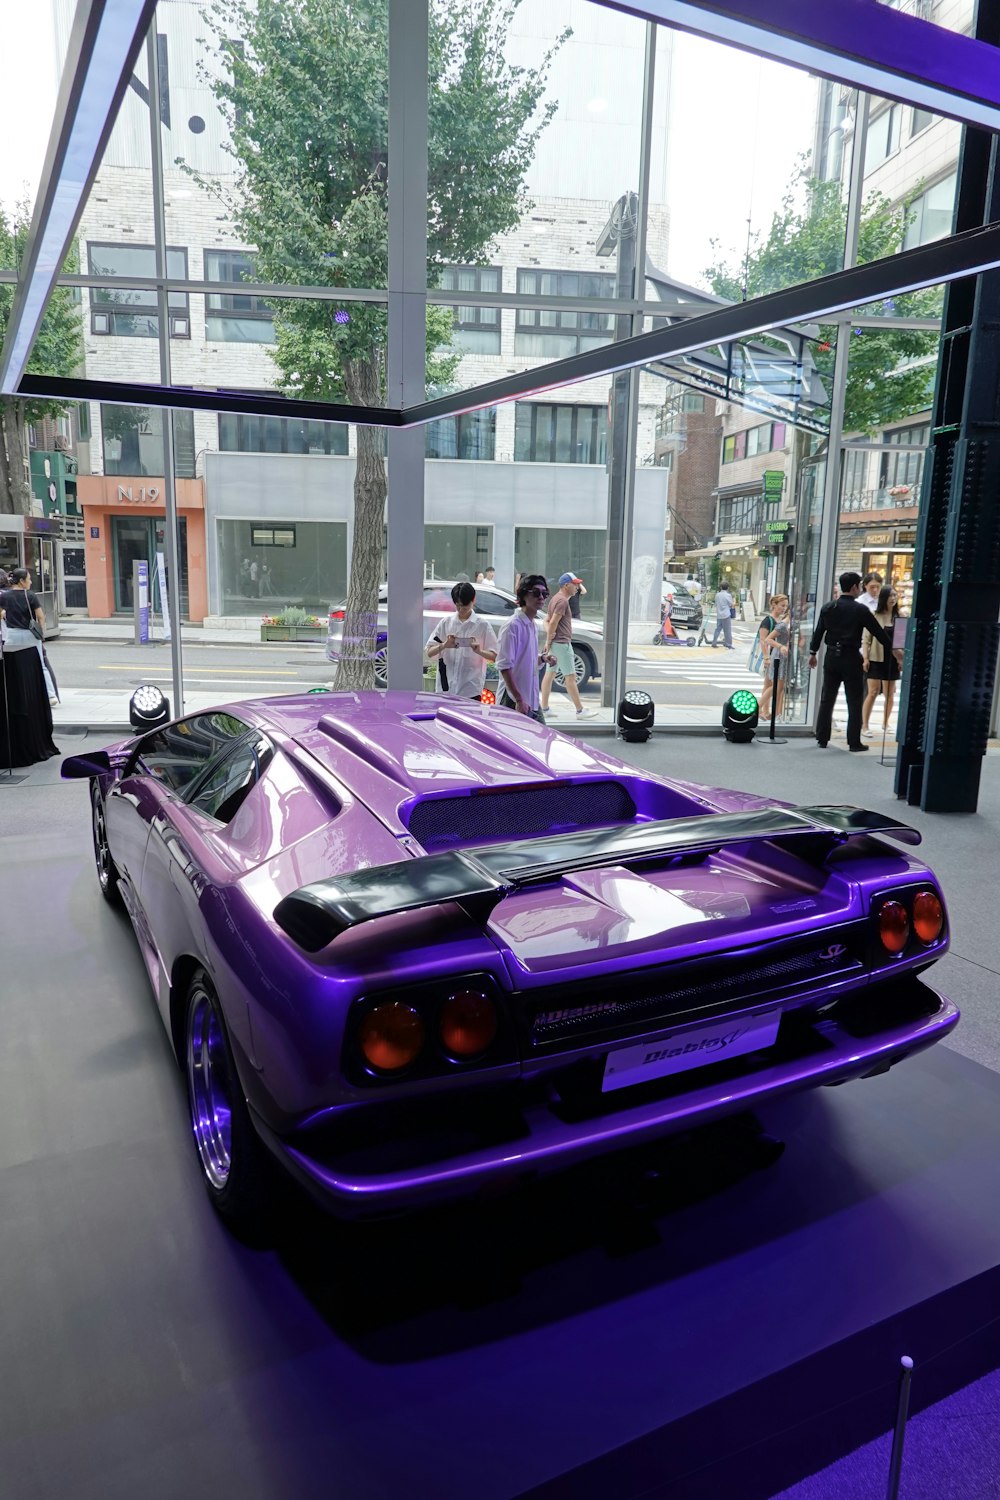 a purple car is on display in a building